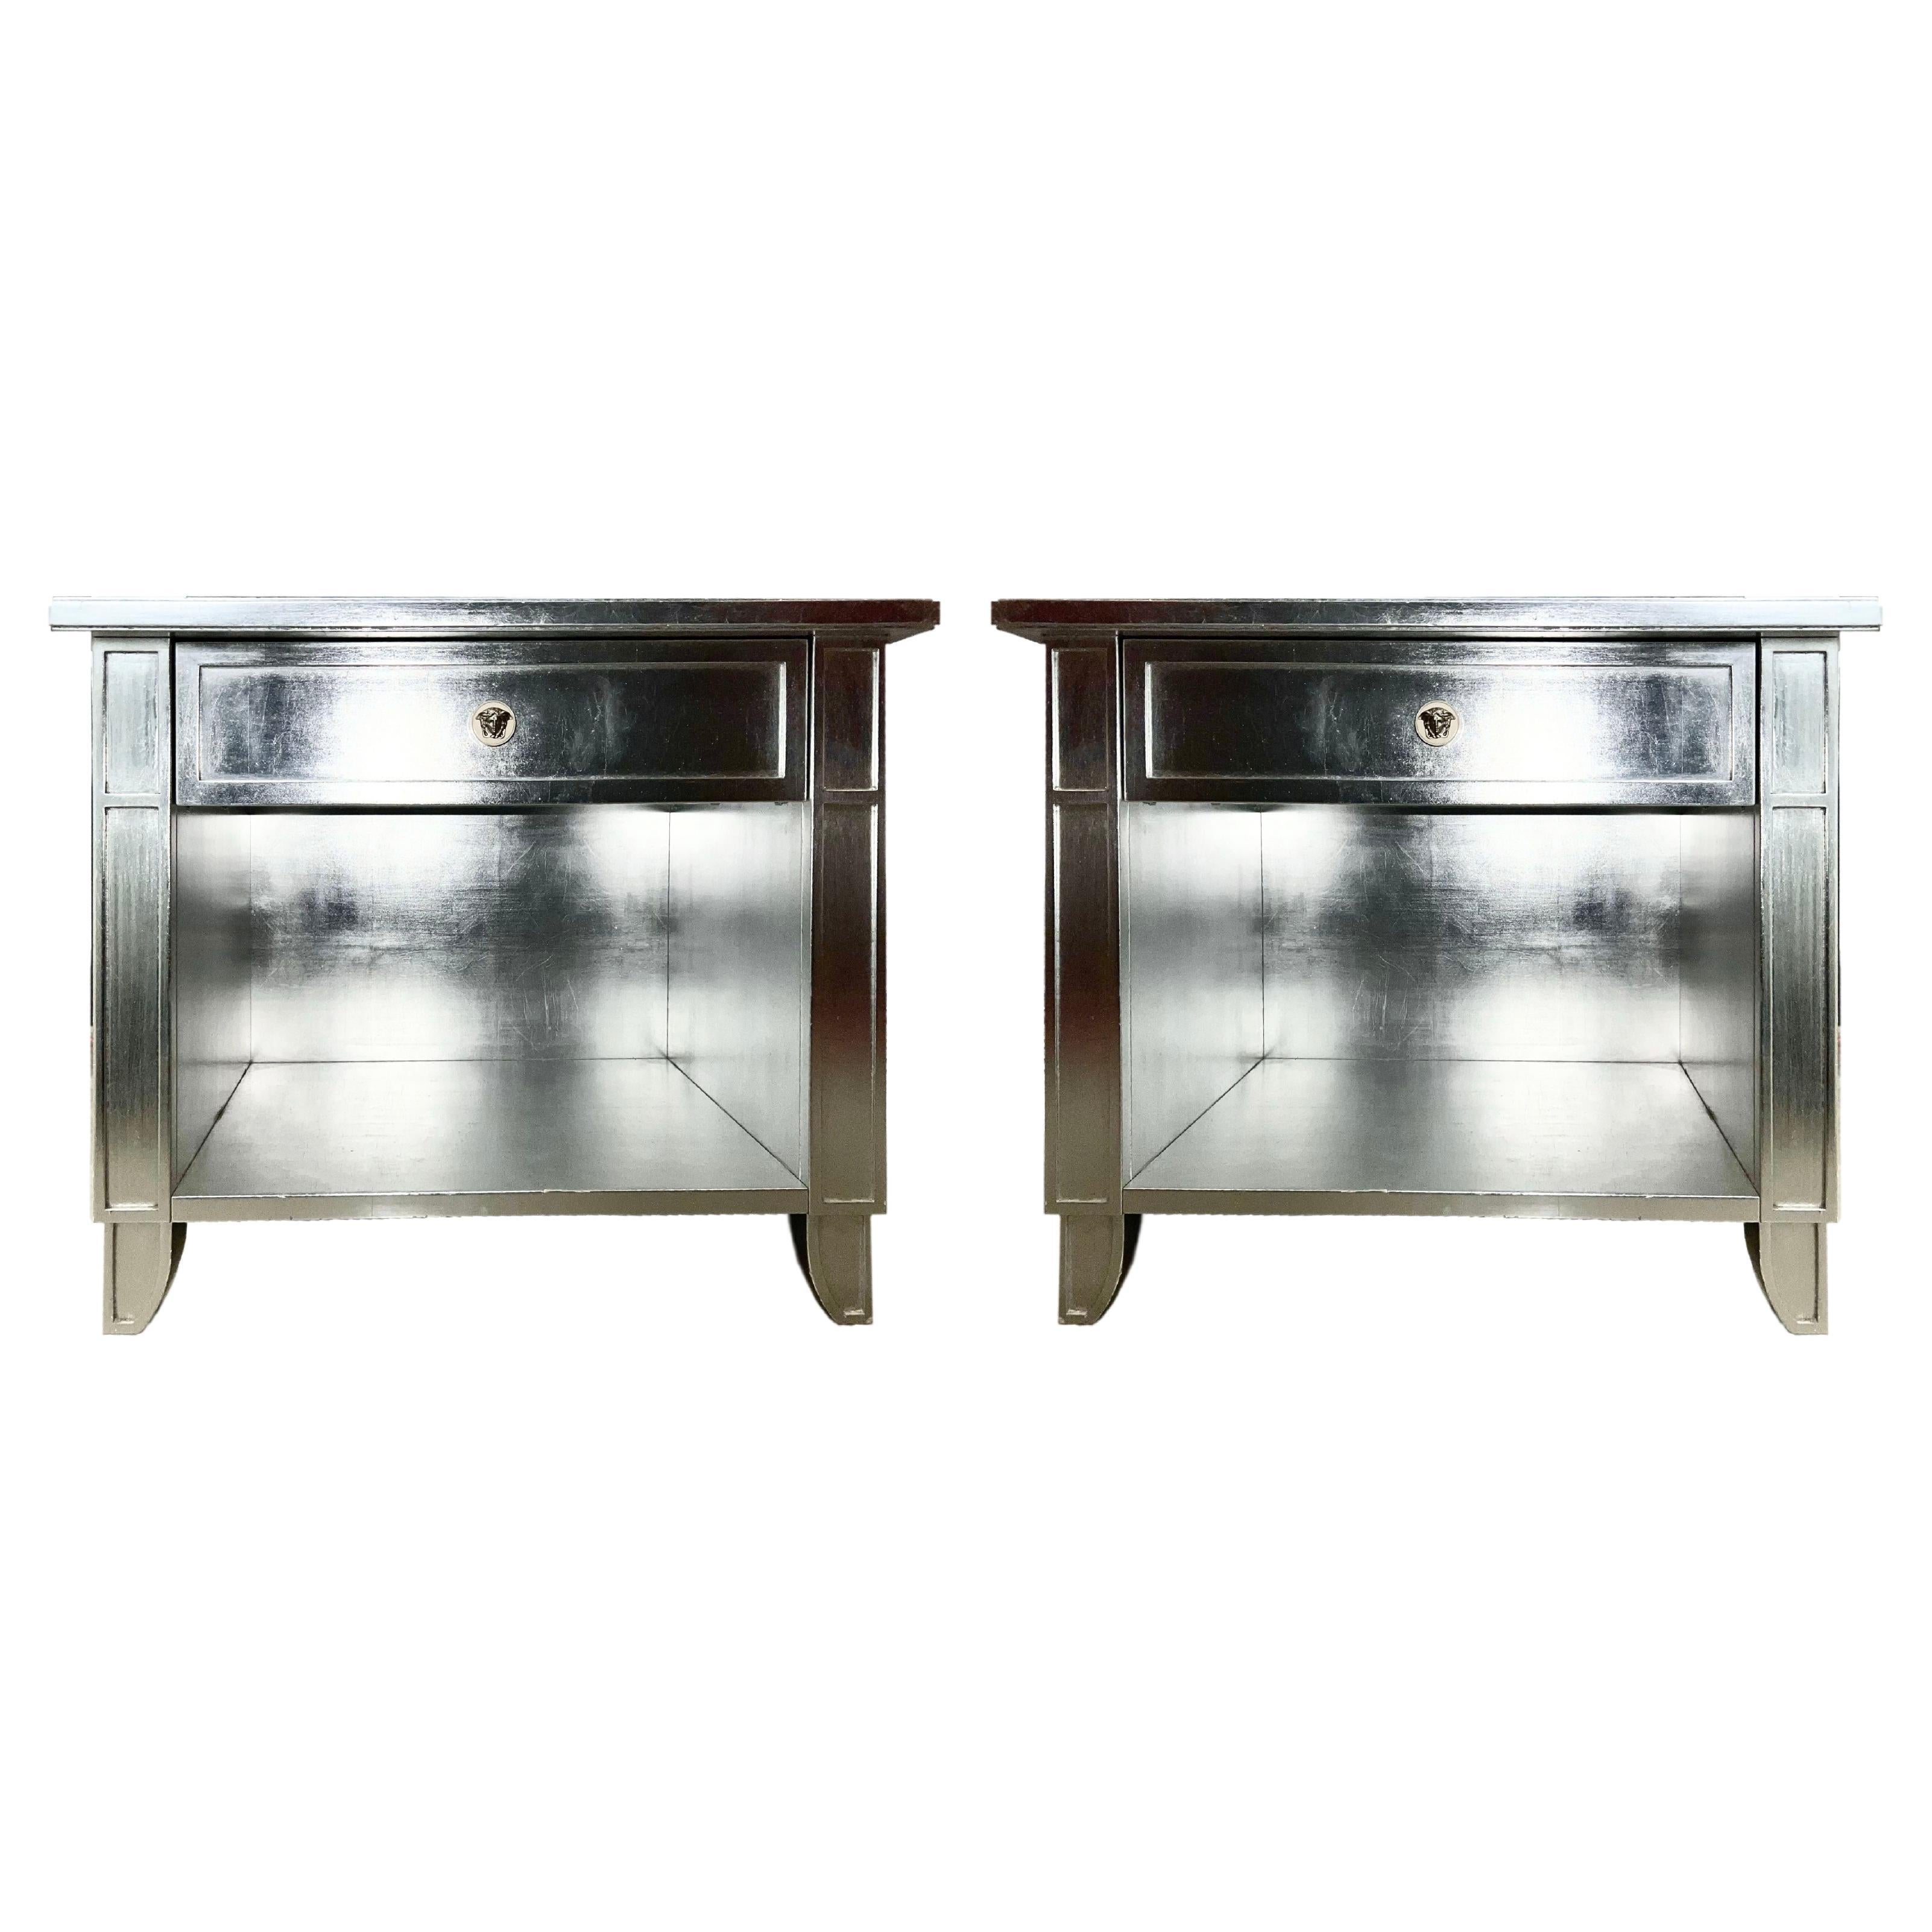 Versace Silvered End Table Pair with Drawer, Medusa Handle, Gianni Versace, 1995